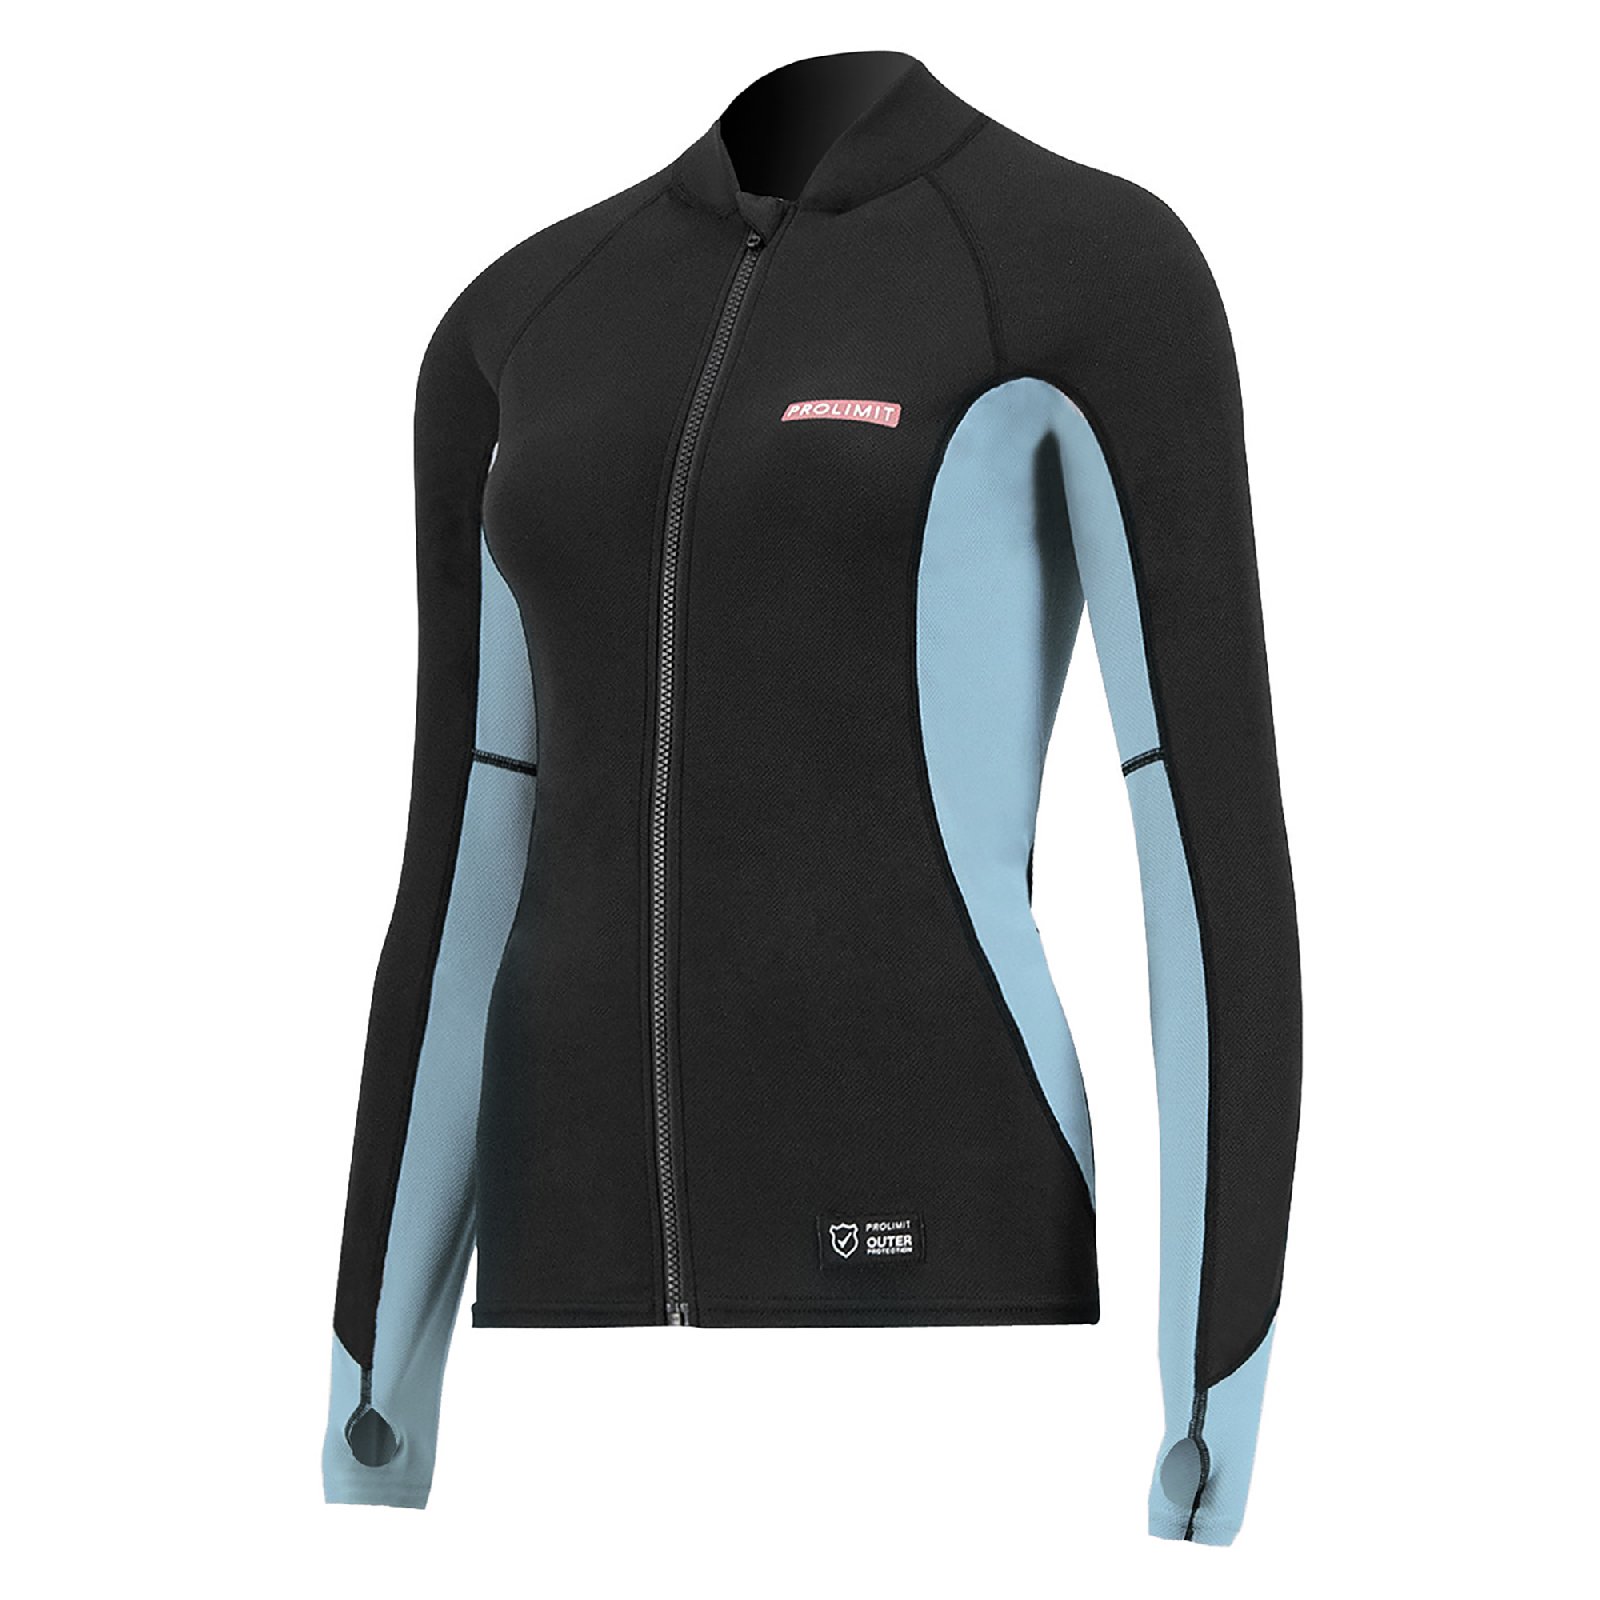 PRO-LIMIT SUP   Sup Top Loosefit Quick Dry Woman  (14700) . 23-